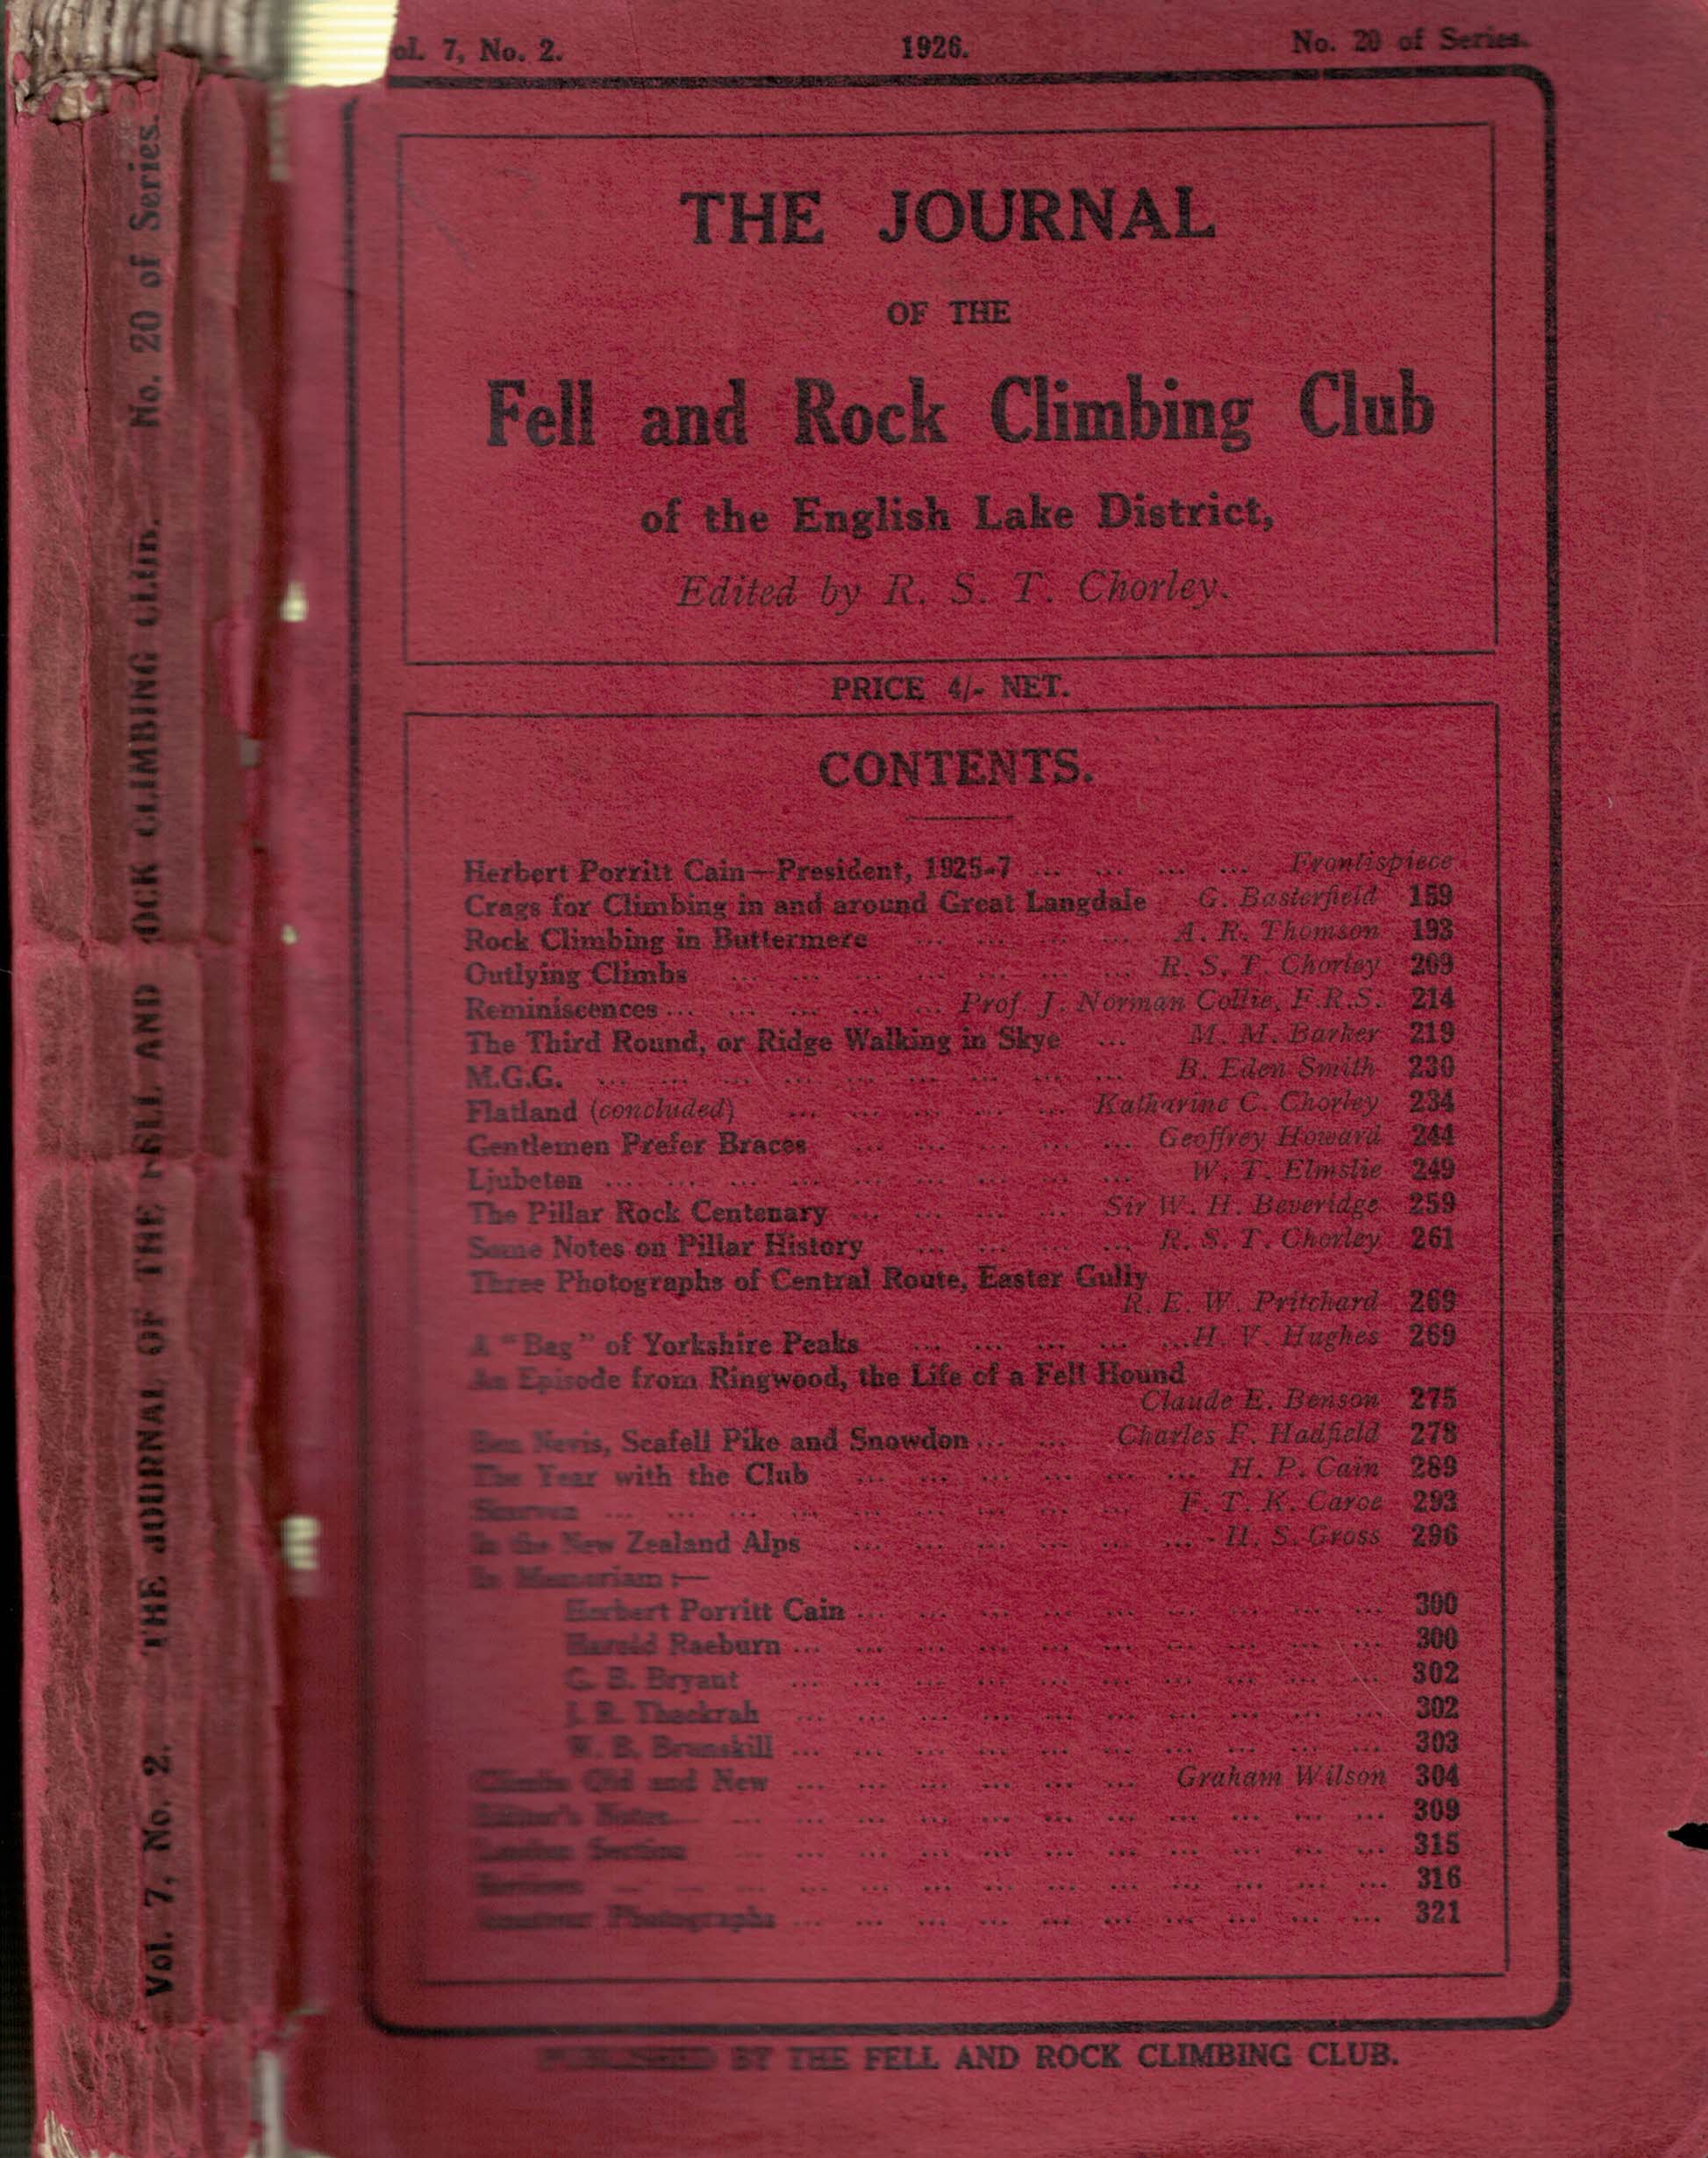 The Journal of the Fell and Rock Climbing Club of the English Lake District. No 20. [Volume 7. No 2.] 1926.